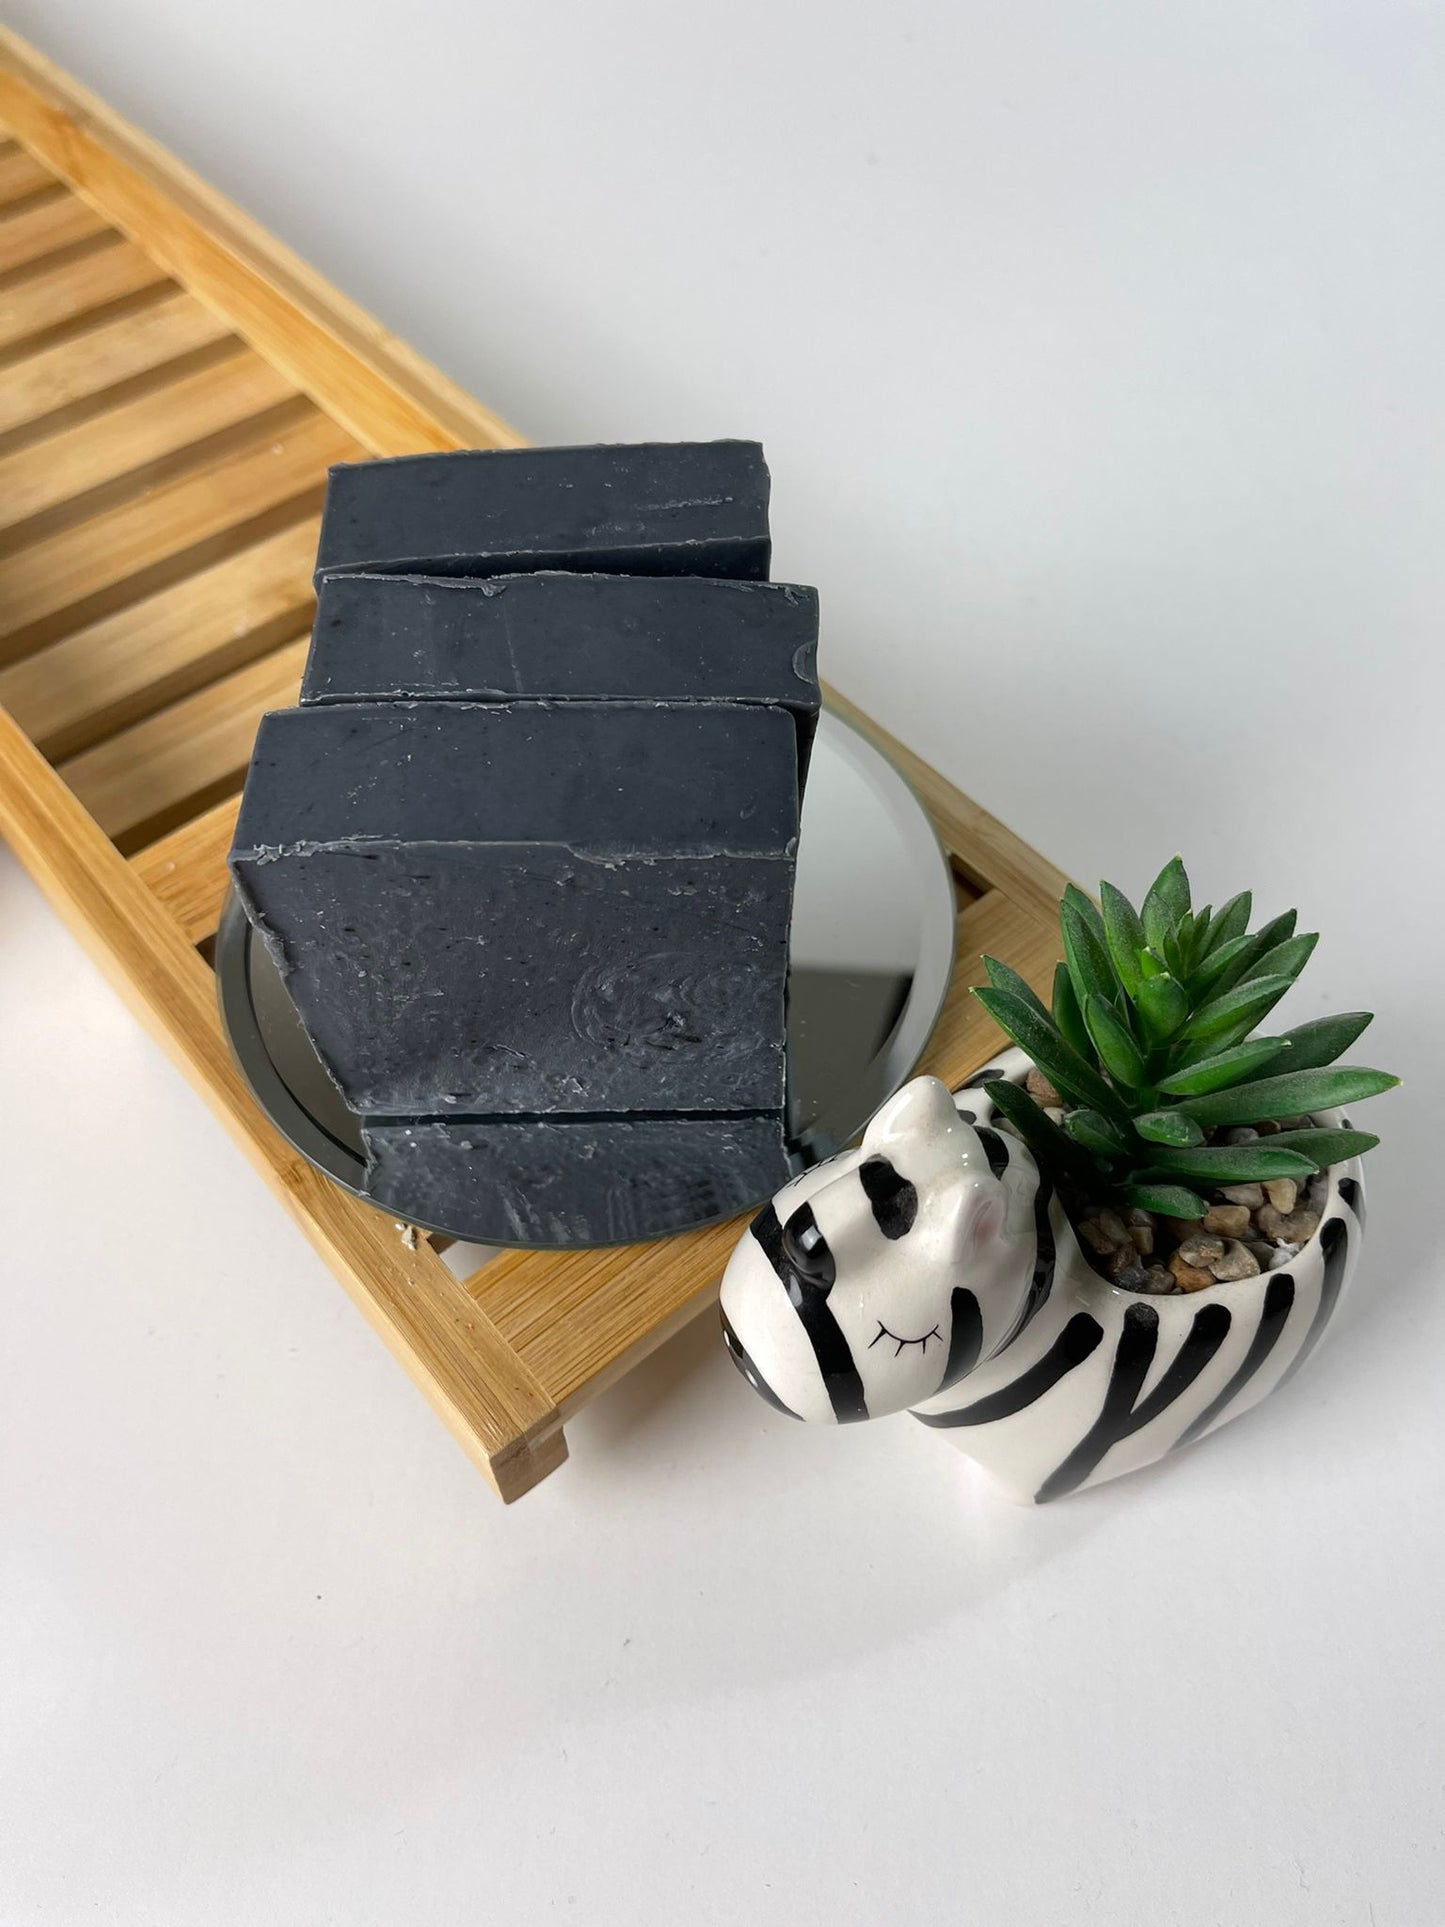 Charcoal, Teatree and Lemongrass soap